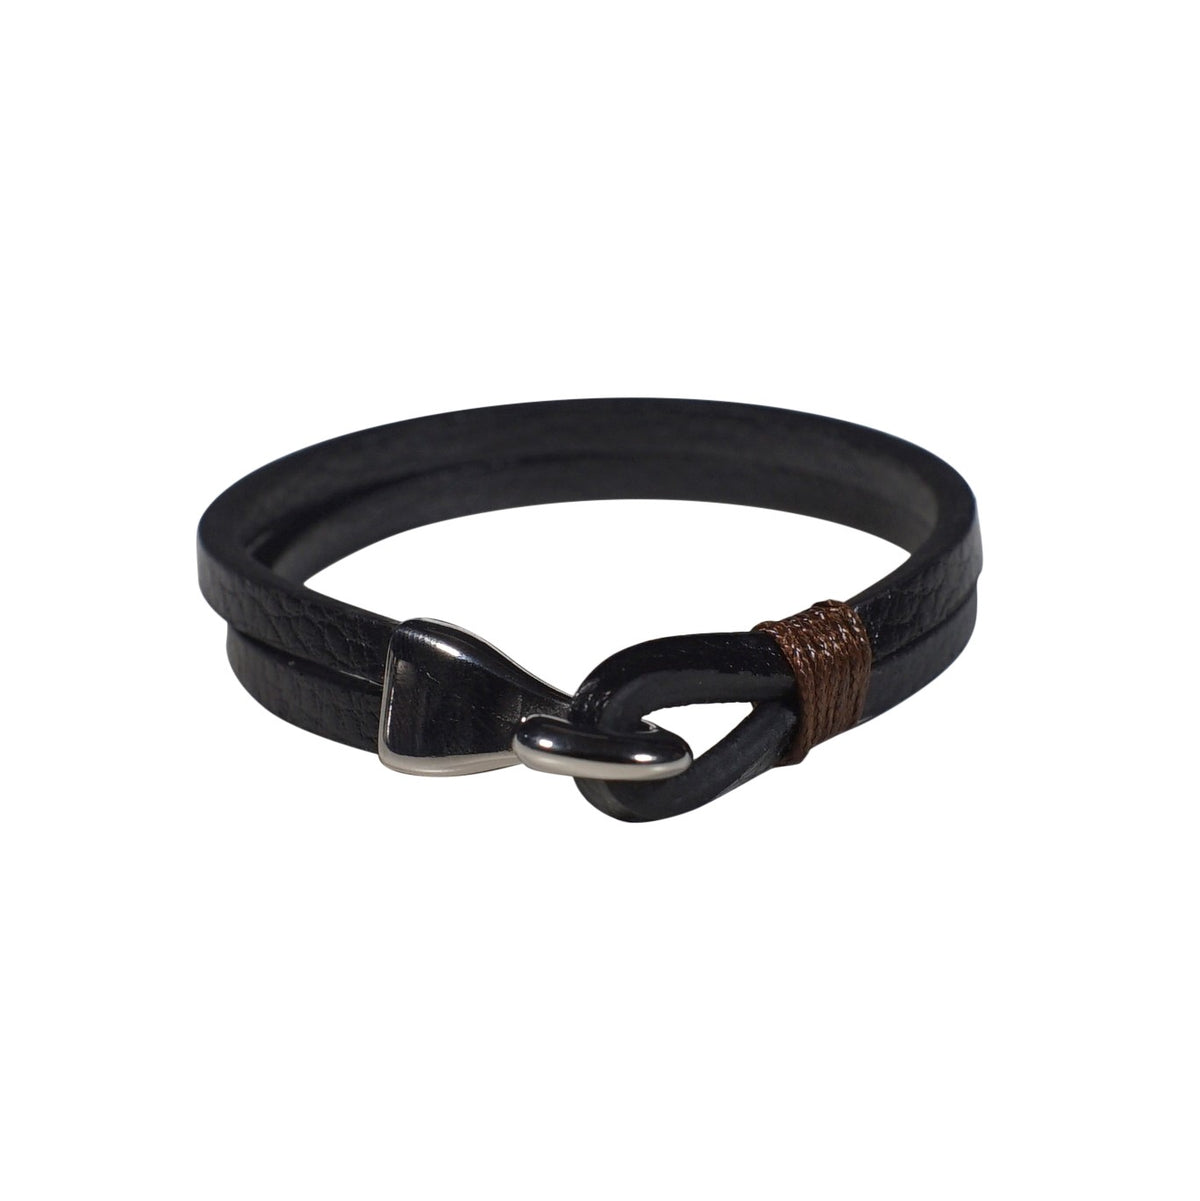 Lincoln Leather Bracelet in Black (Size M) - Nomad Watch Works Malaysia